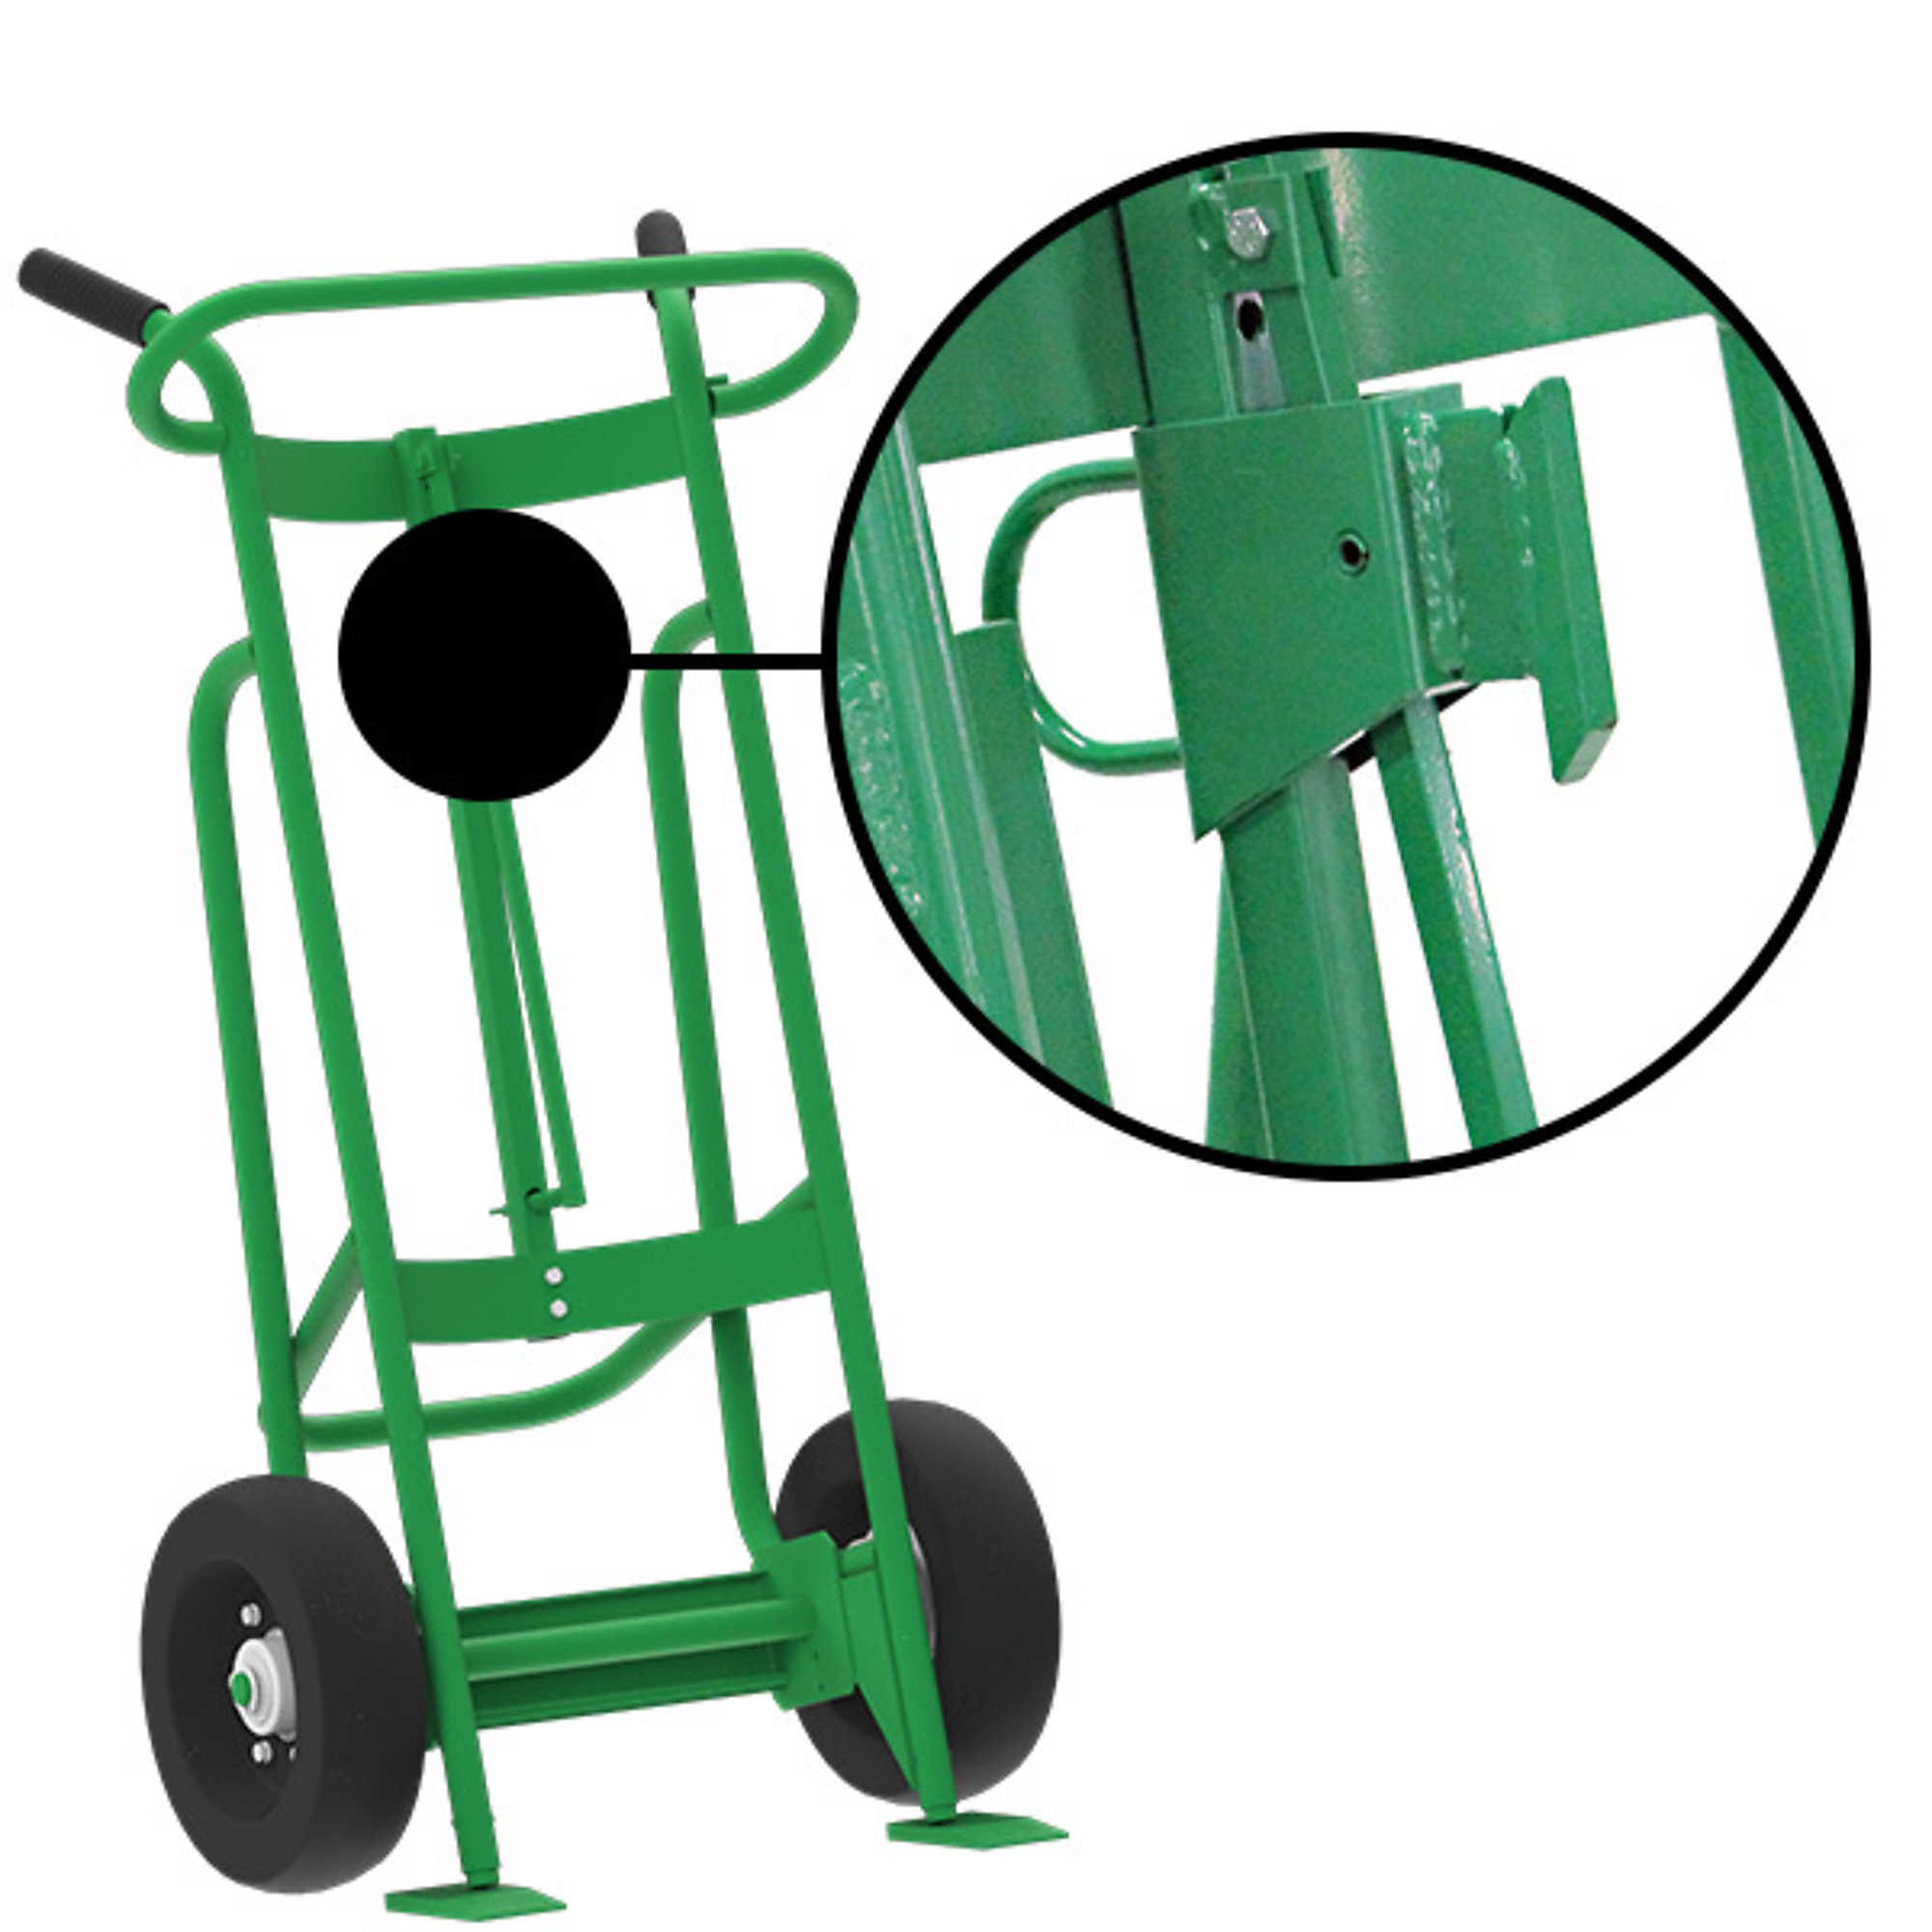 Valley Craft, 2-Wheel Drum Hand Truck, Load Capacity 1000 lb, Height 52 in, Material Steel, Model F82025A4F